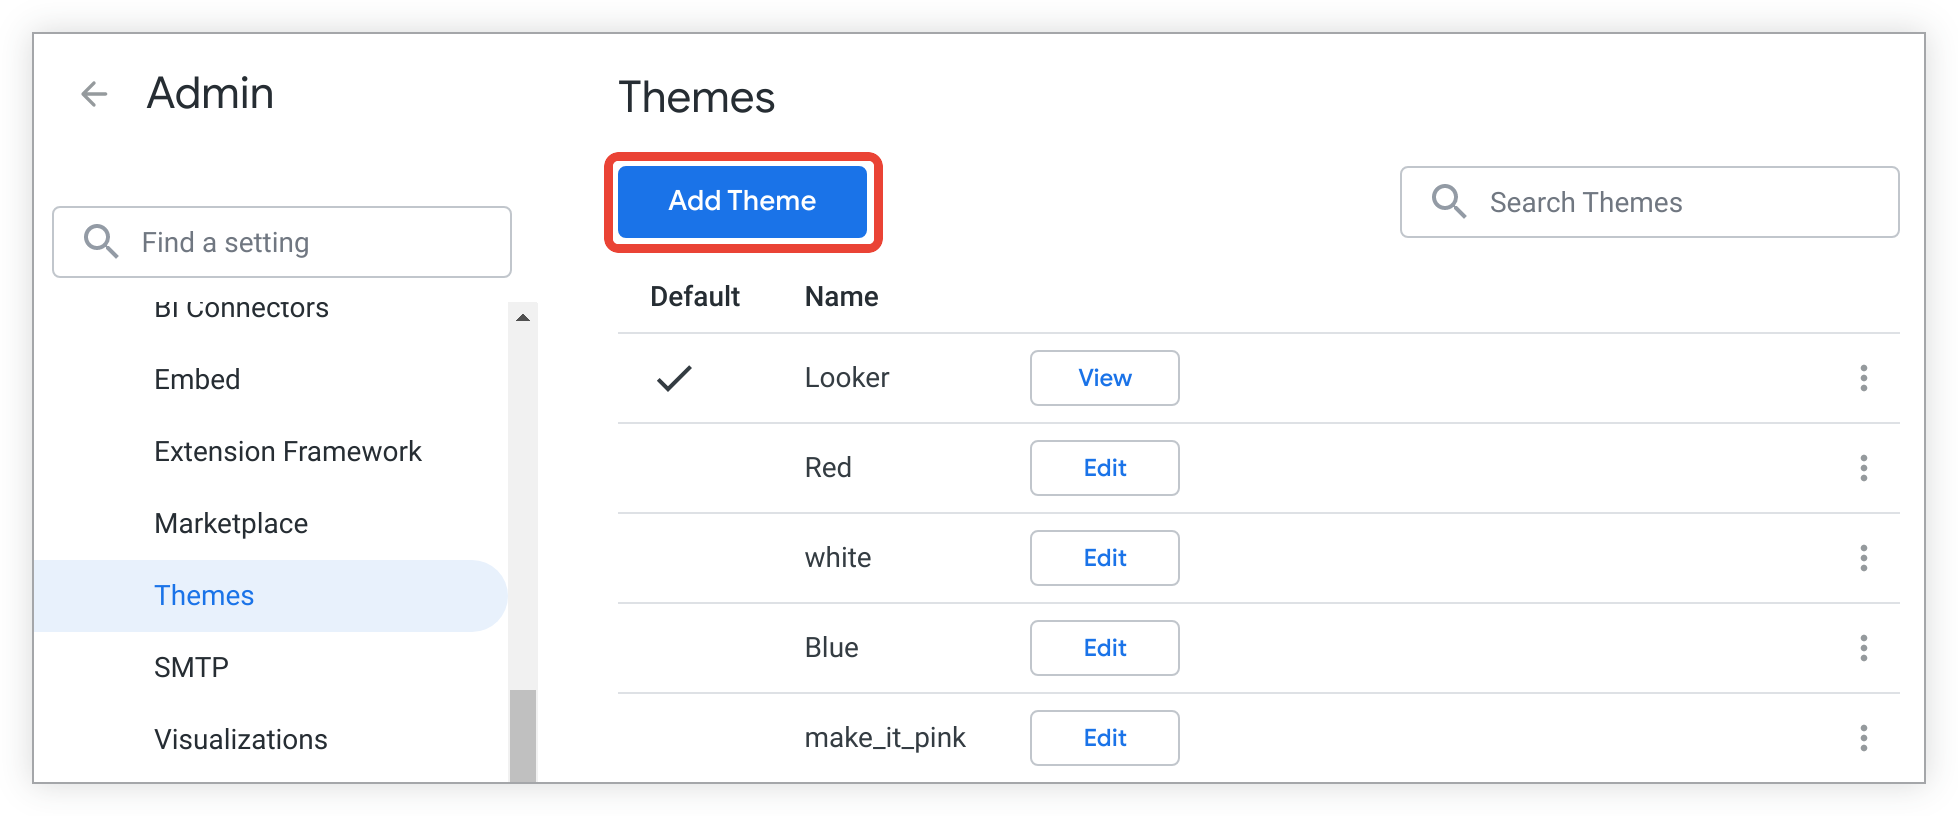 The Add Theme button appears at the top of the Themes page.